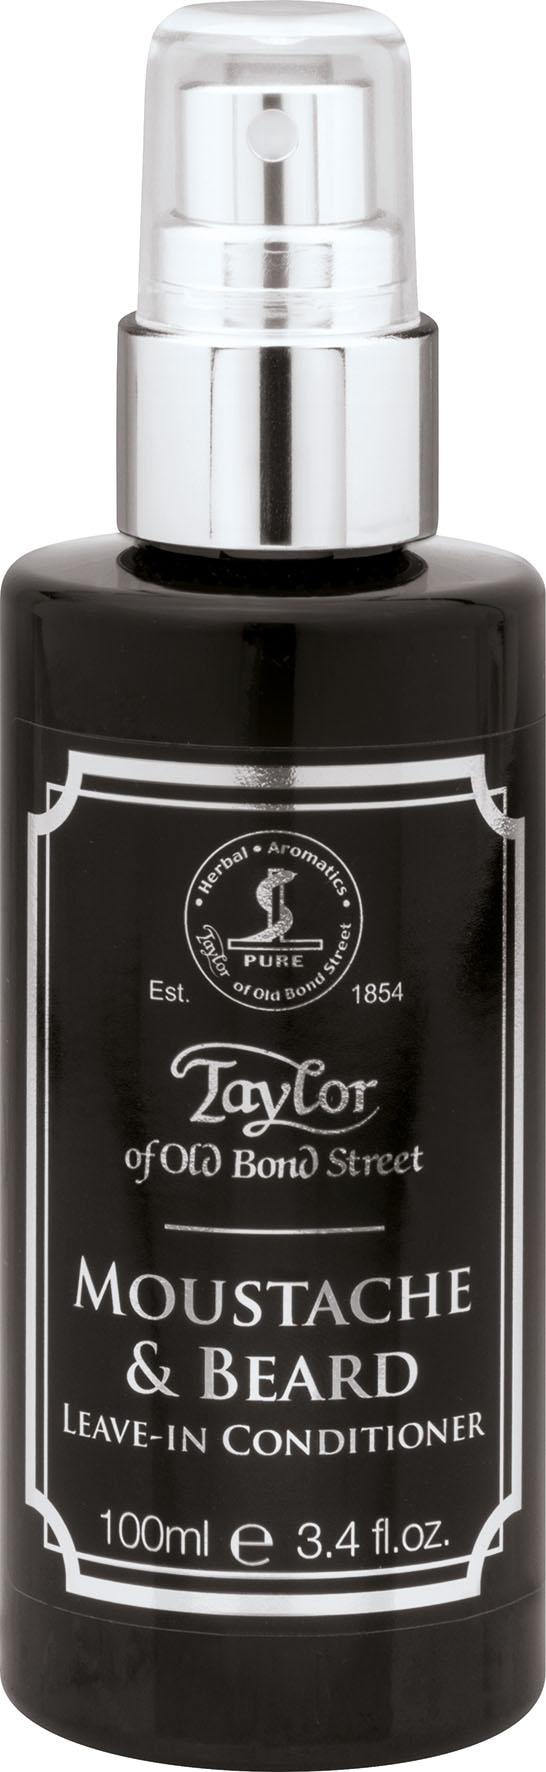 Conditioner« Beard Taylor »Moustache & Bartconditioner kaufen Leave-In OTTO of online Bond Old Street bei